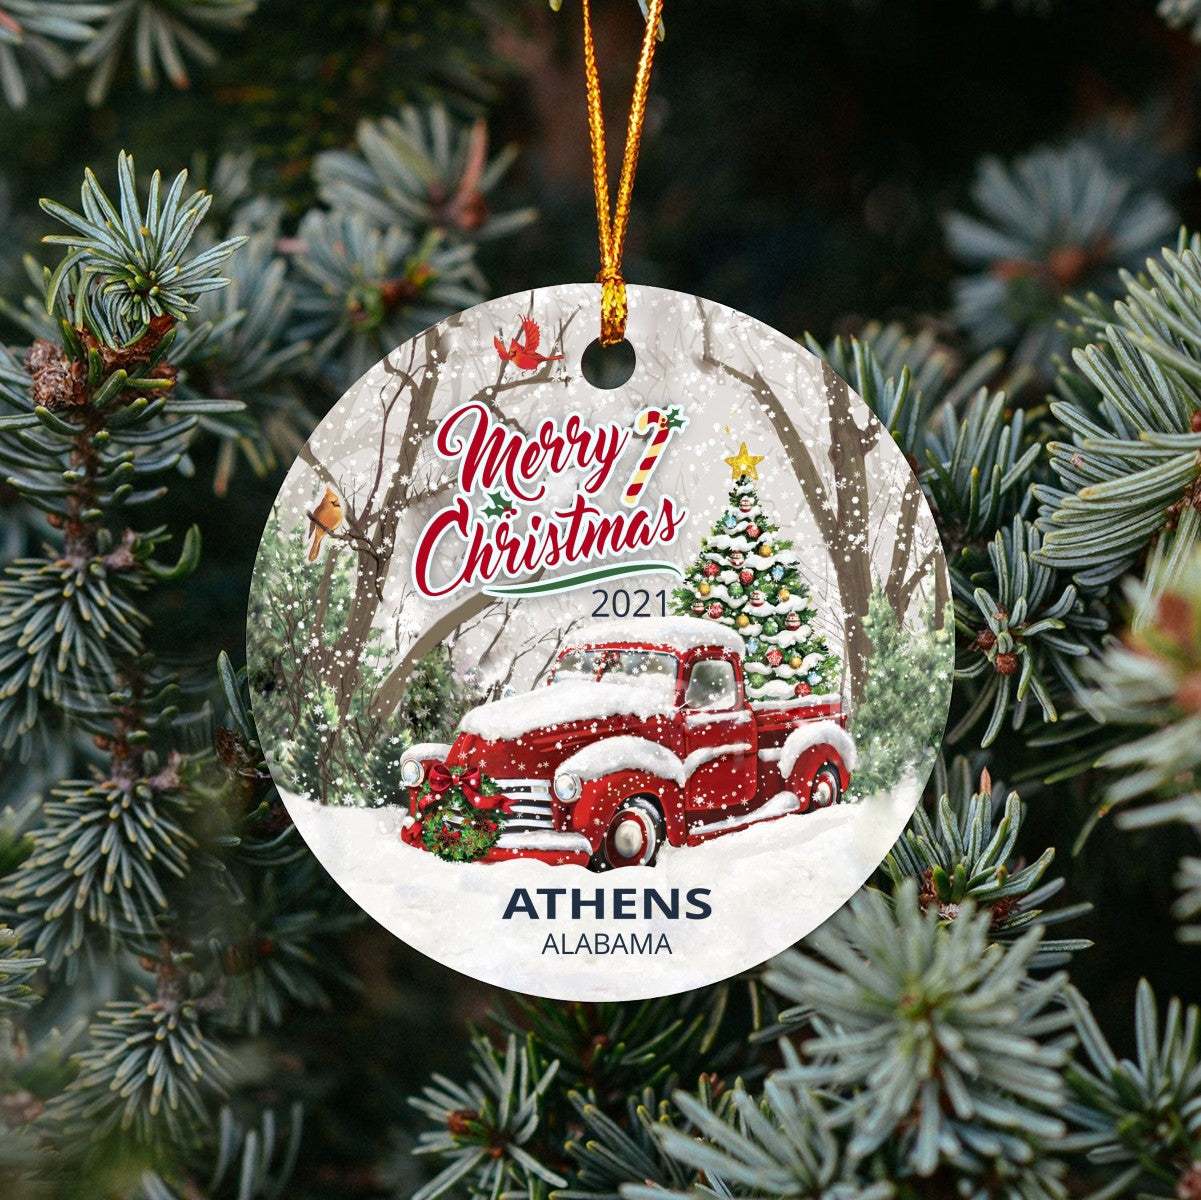 Christmas Tree Ornaments Athens - Ornament Customize With Name City And State Athens Alabama AL - Red Truck Xmas Ornaments 3'' Plastic Gift For Family, Friend And Housewarming